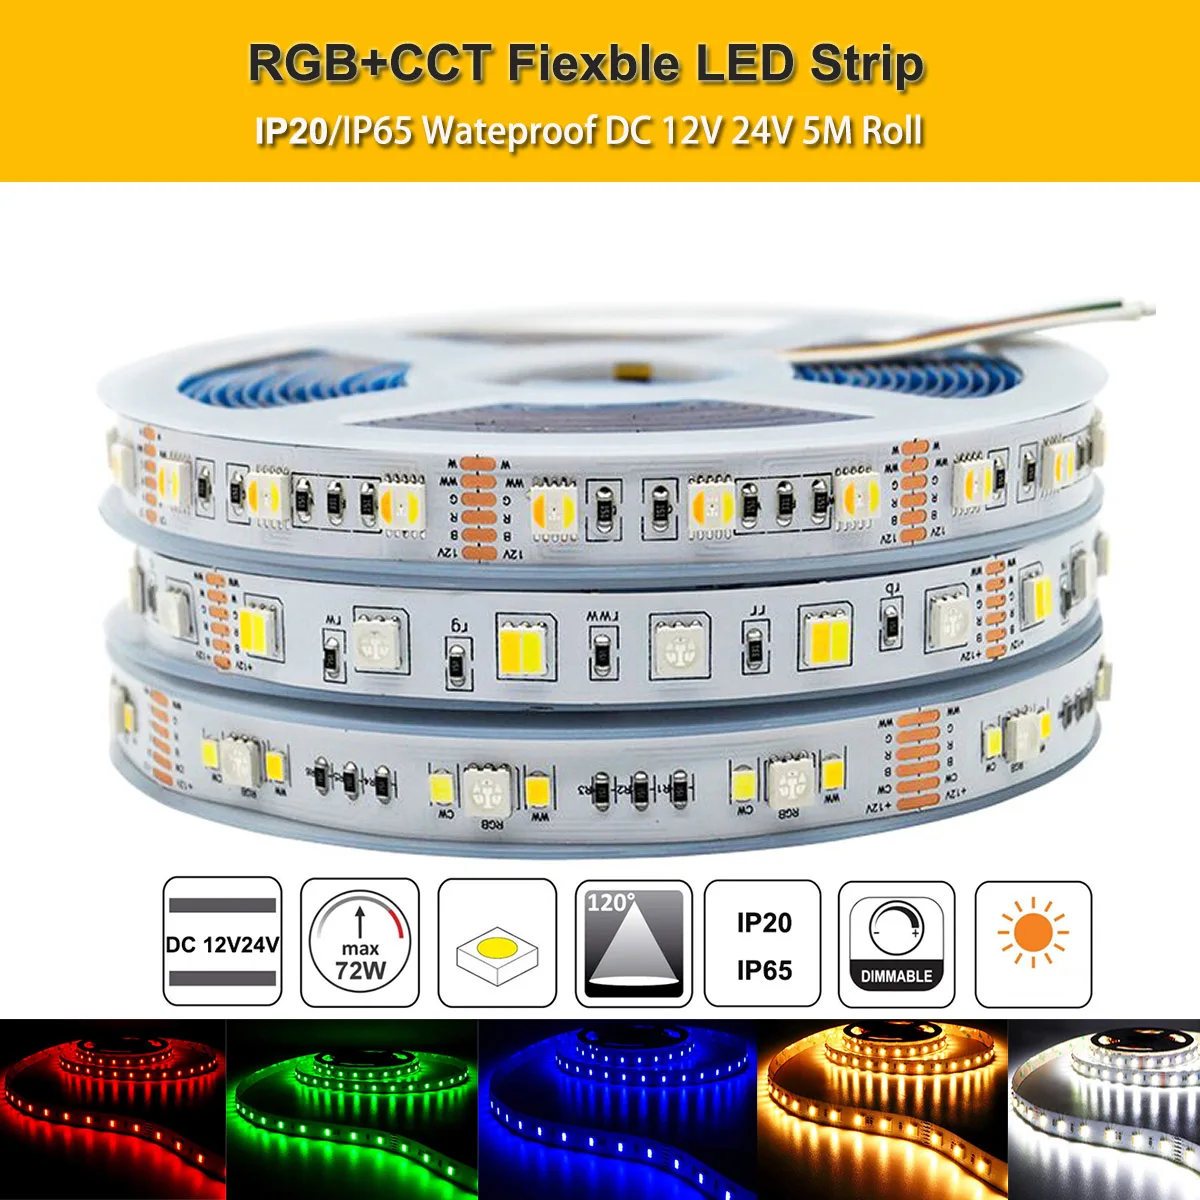 

DC12V 24V 5M 60LEDs/m RGB+CCT 5IN1 LED Strip Light RGB+White+Warm White 5050 SMD Dual White Temperature Adjustable 12MM 6pin PCB